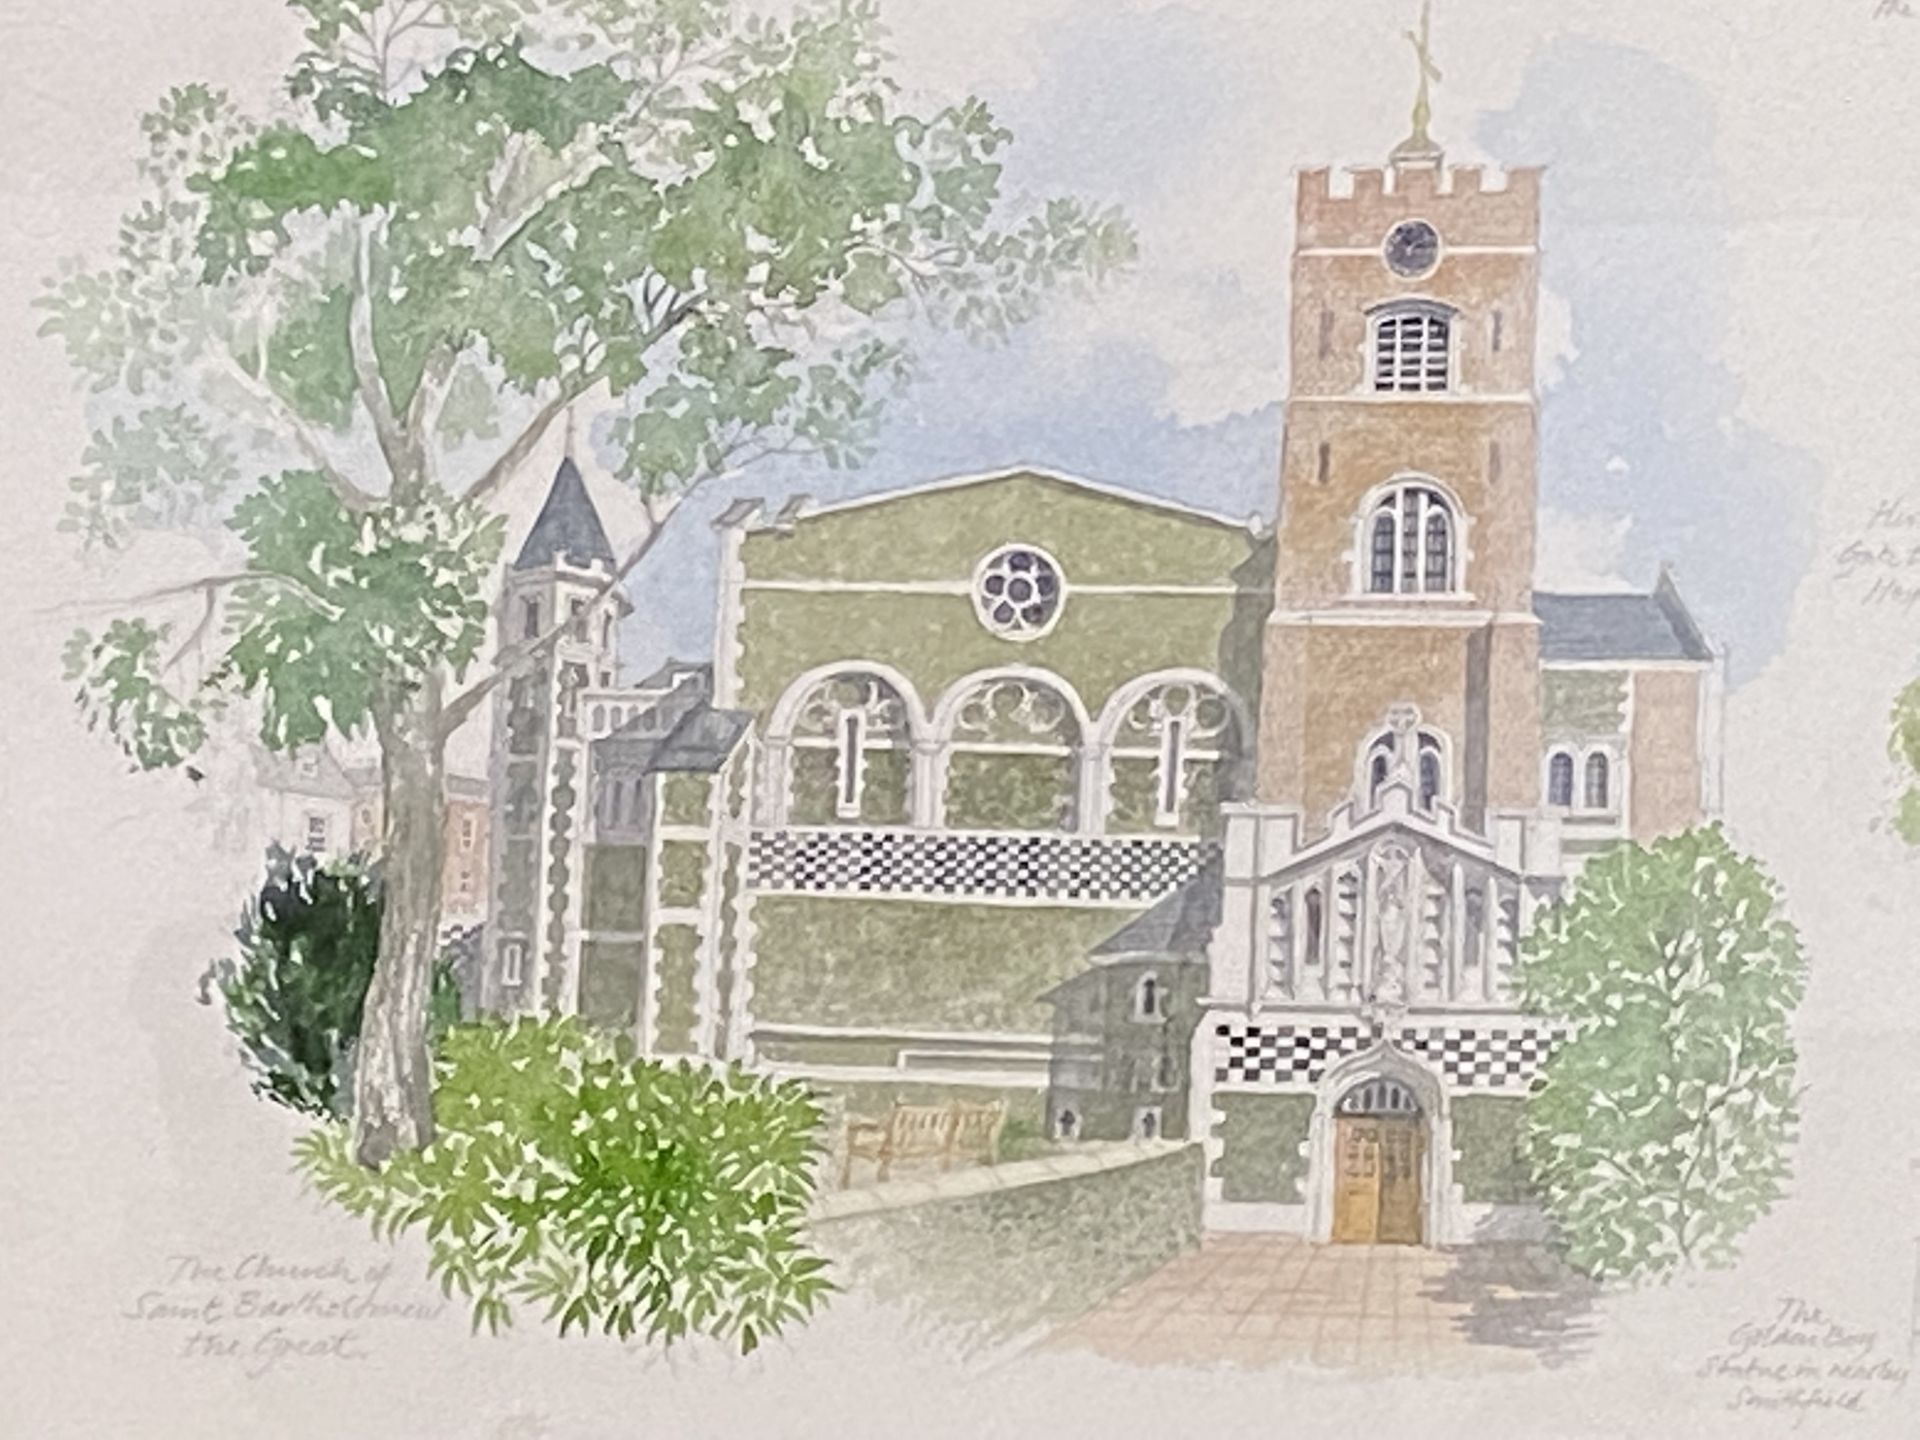 Watercolour of the Church of St. Bartholomew the Great - Image 2 of 5